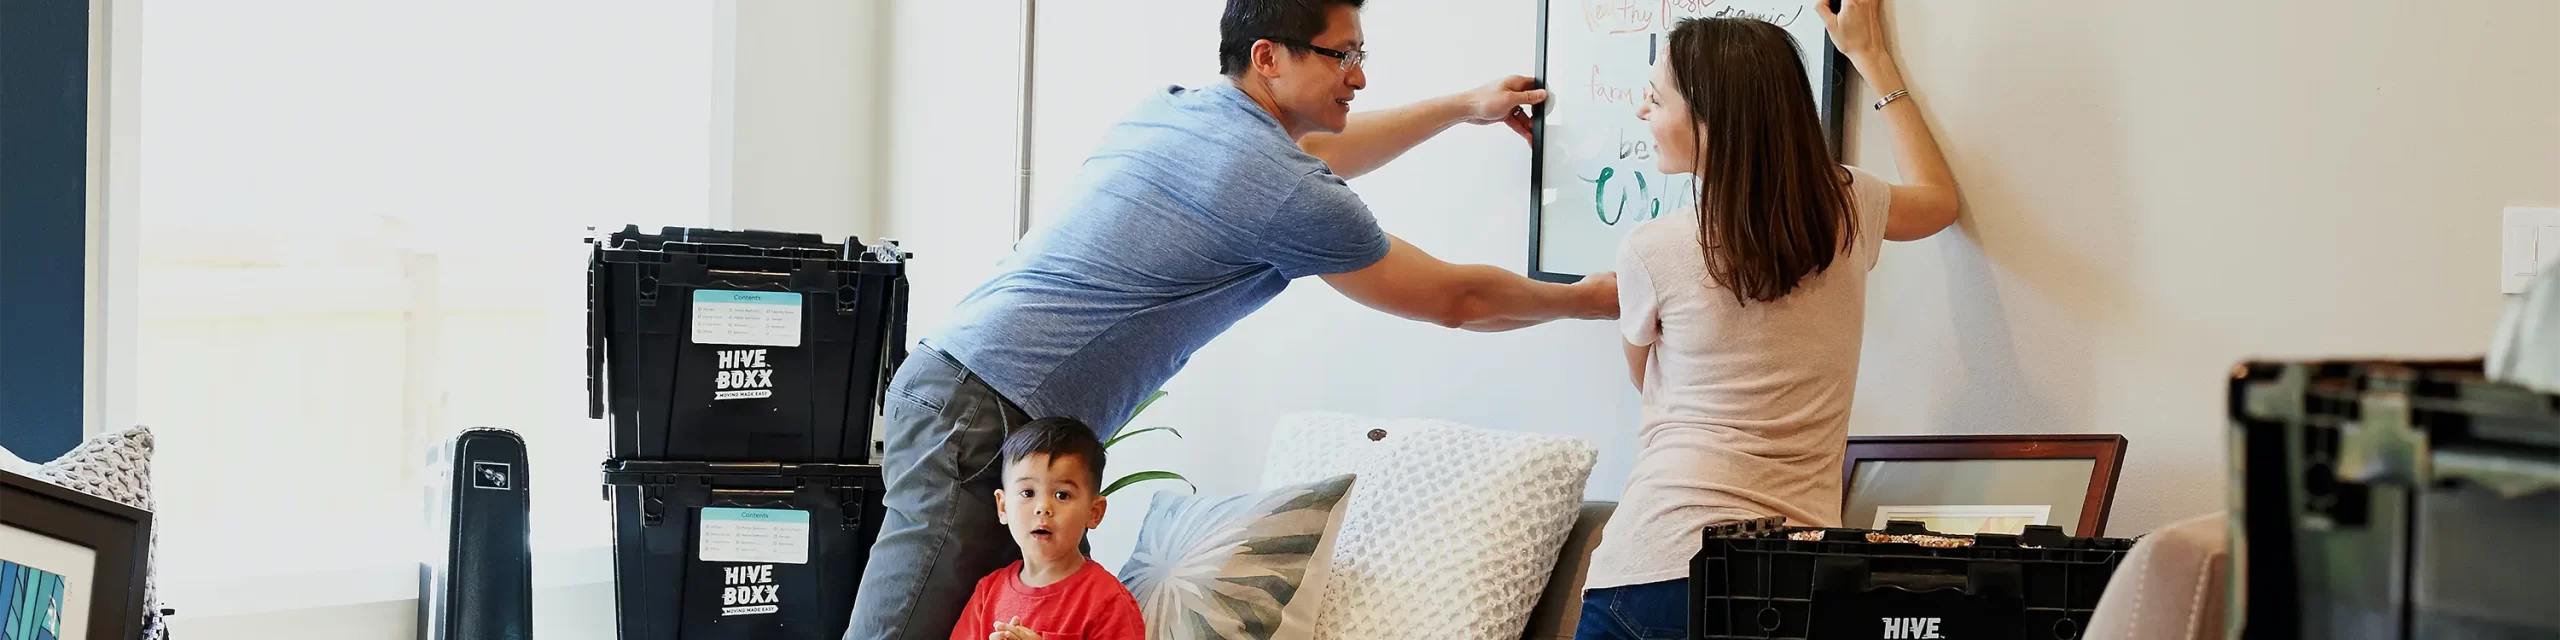 Man and woman hanging photo while toddler looks on